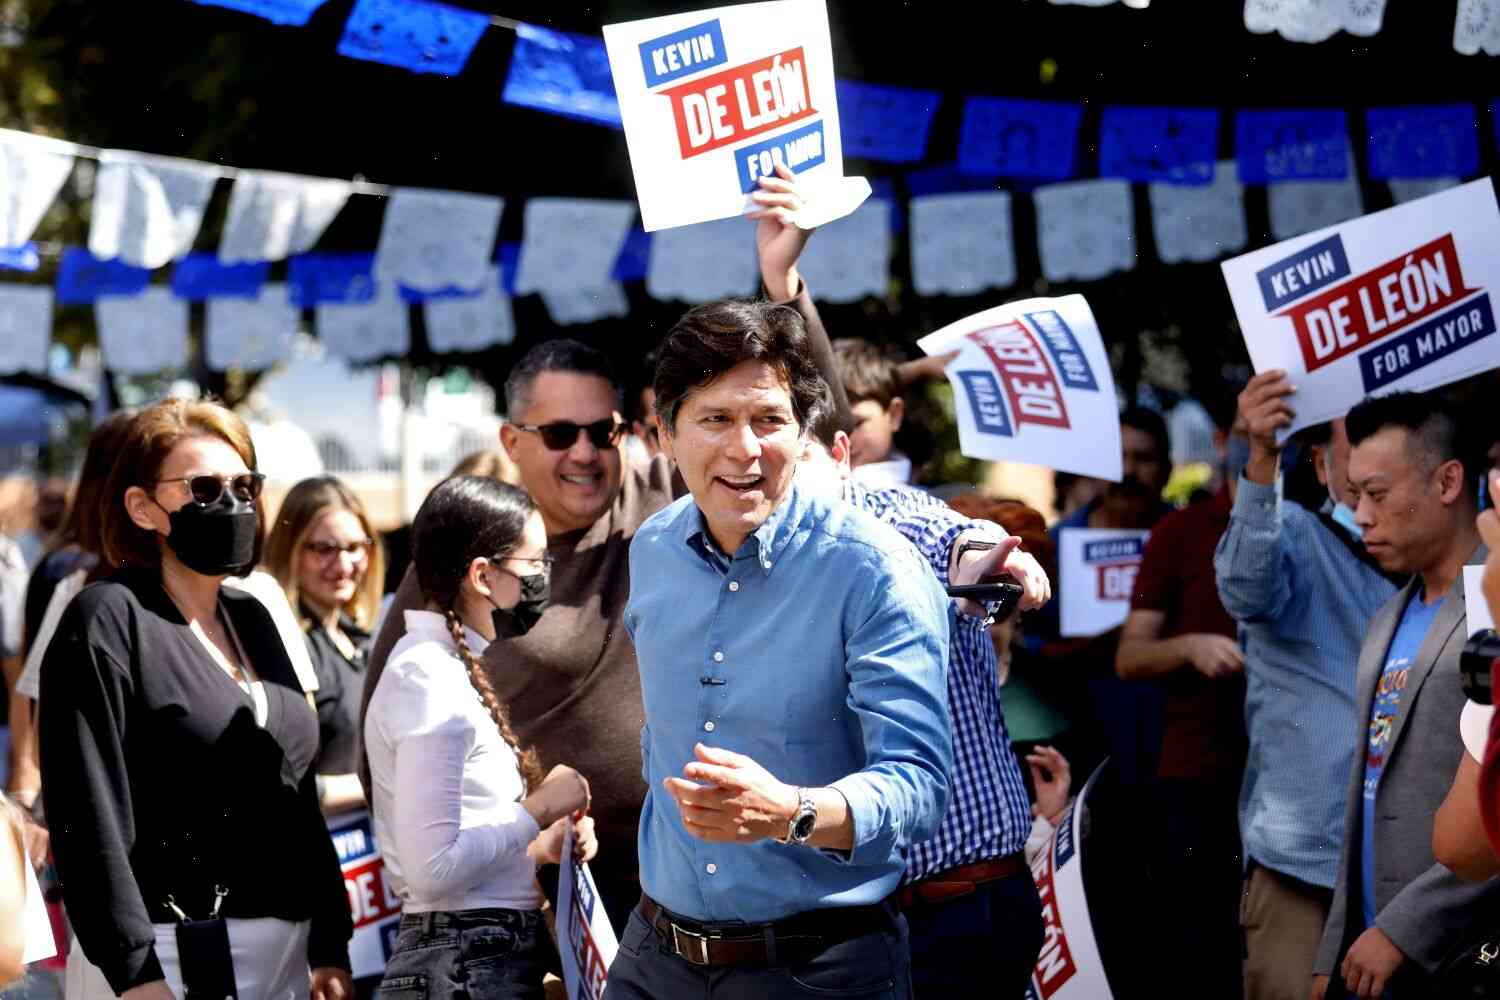 Kevin de León's absences as a council staffer will cost him taxpayer money